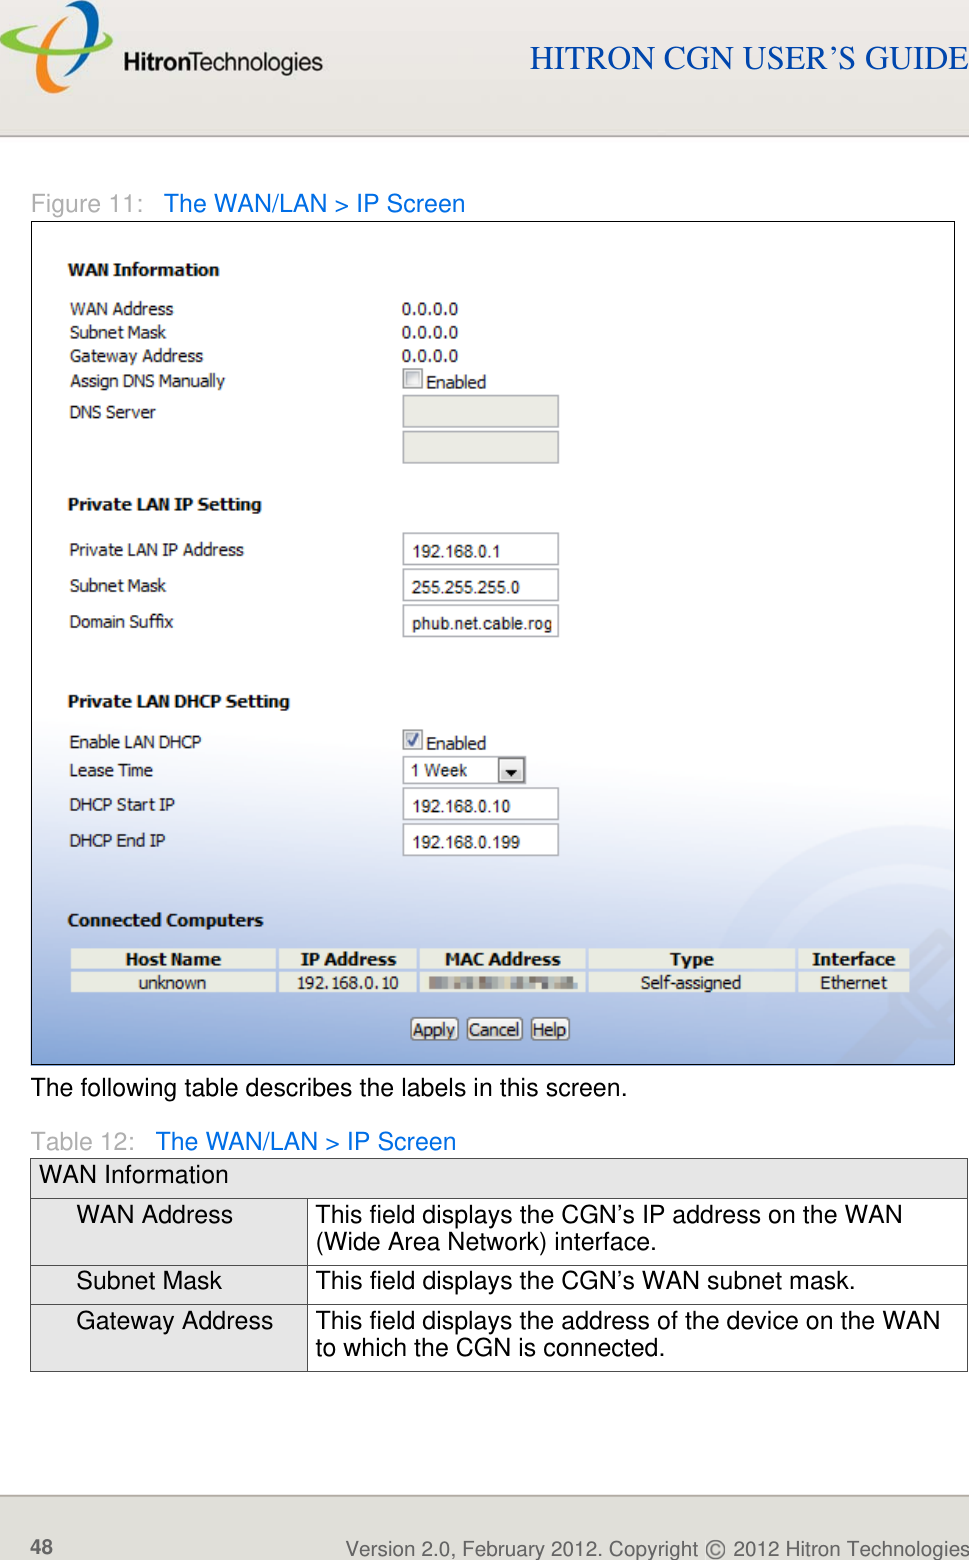 WAN/LANVersion 2.0, February 2012. Copyright   2012 Hitron Technologies48Version 2.0, February 2012. Copyright   2012 Hitron Technologies48HITRON CGN USER’S GUIDEFigure 11:   The WAN/LAN &gt; IP ScreenThe following table describes the labels in this screen.Table 12:   The WAN/LAN &gt; IP ScreenWAN InformationWAN Address This field displays the CGN’s IP address on the WAN (Wide Area Network) interface.Subnet Mask This field displays the CGN’s WAN subnet mask.Gateway Address This field displays the address of the device on the WAN to which the CGN is connected.